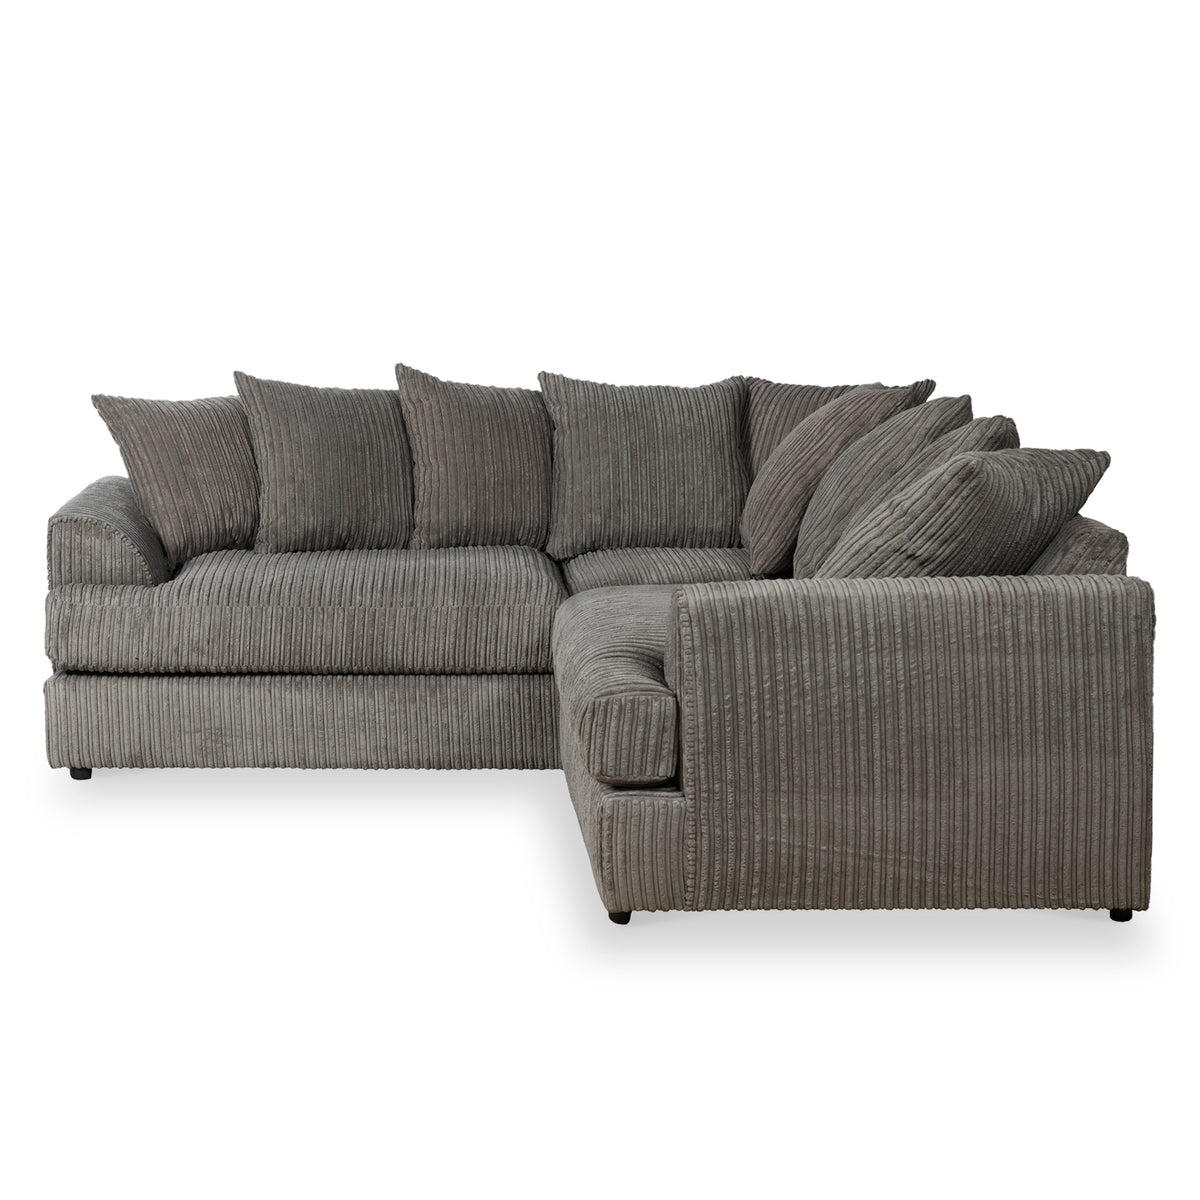 Bletchley Charcoal Jumbo Cord Corner Couch from Roseland Furniture